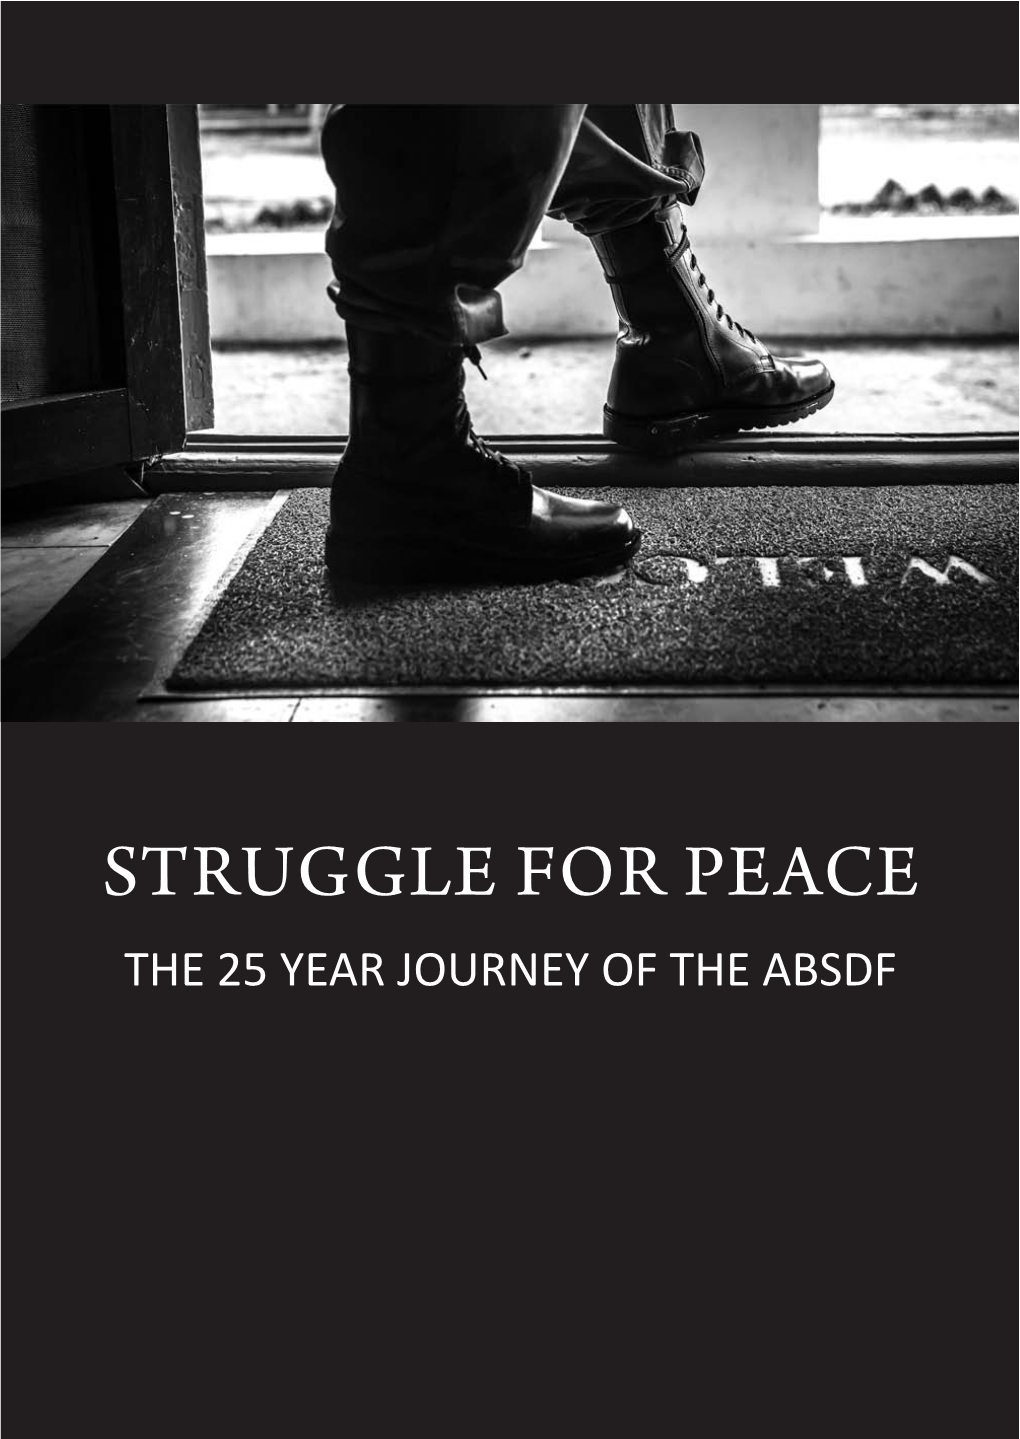 The 25 Year Journey of the ABSDF